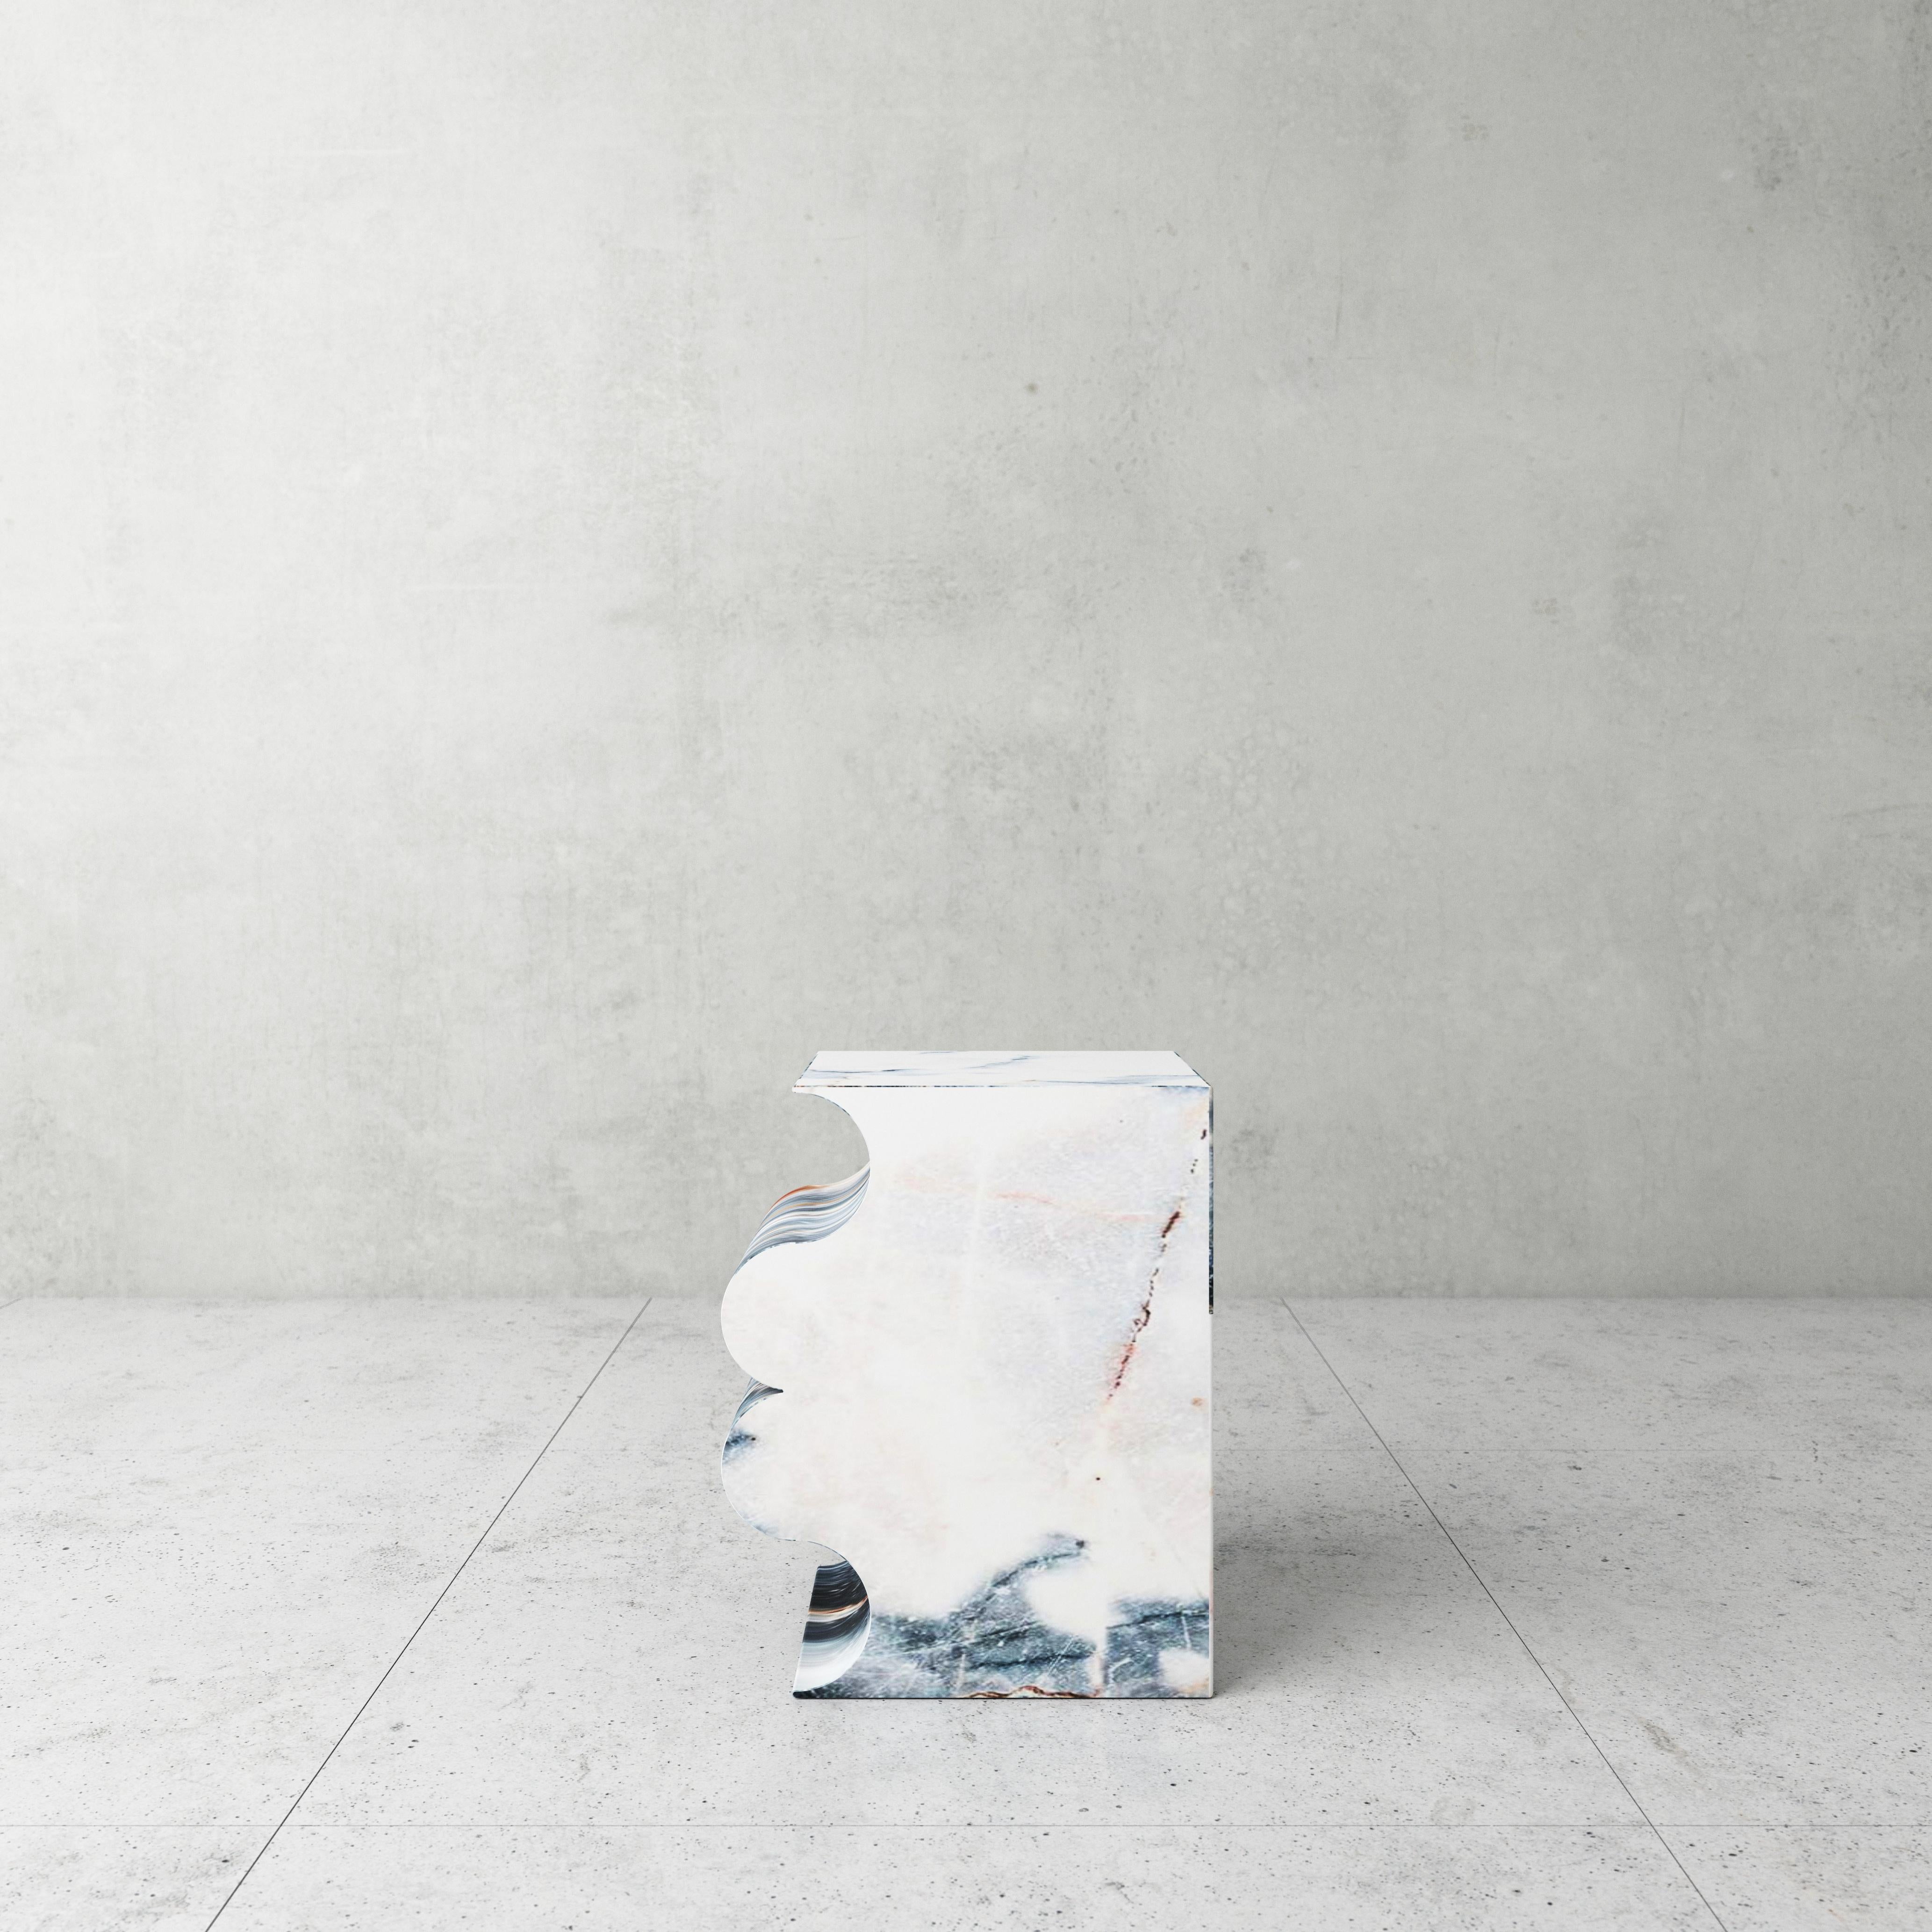 Paonazzo Marble Sculpted stool by Pietro Franceschini
Sold exclusively by Galerie Philia
Materials: Paonazzo marble
Dimensions: W 32cm, L 41cm, H 50cm
Origin: Italy (Carrara)
Manufacturer: Corsanini SRL

Pietro Franceschini
Pietro Franceschini is an